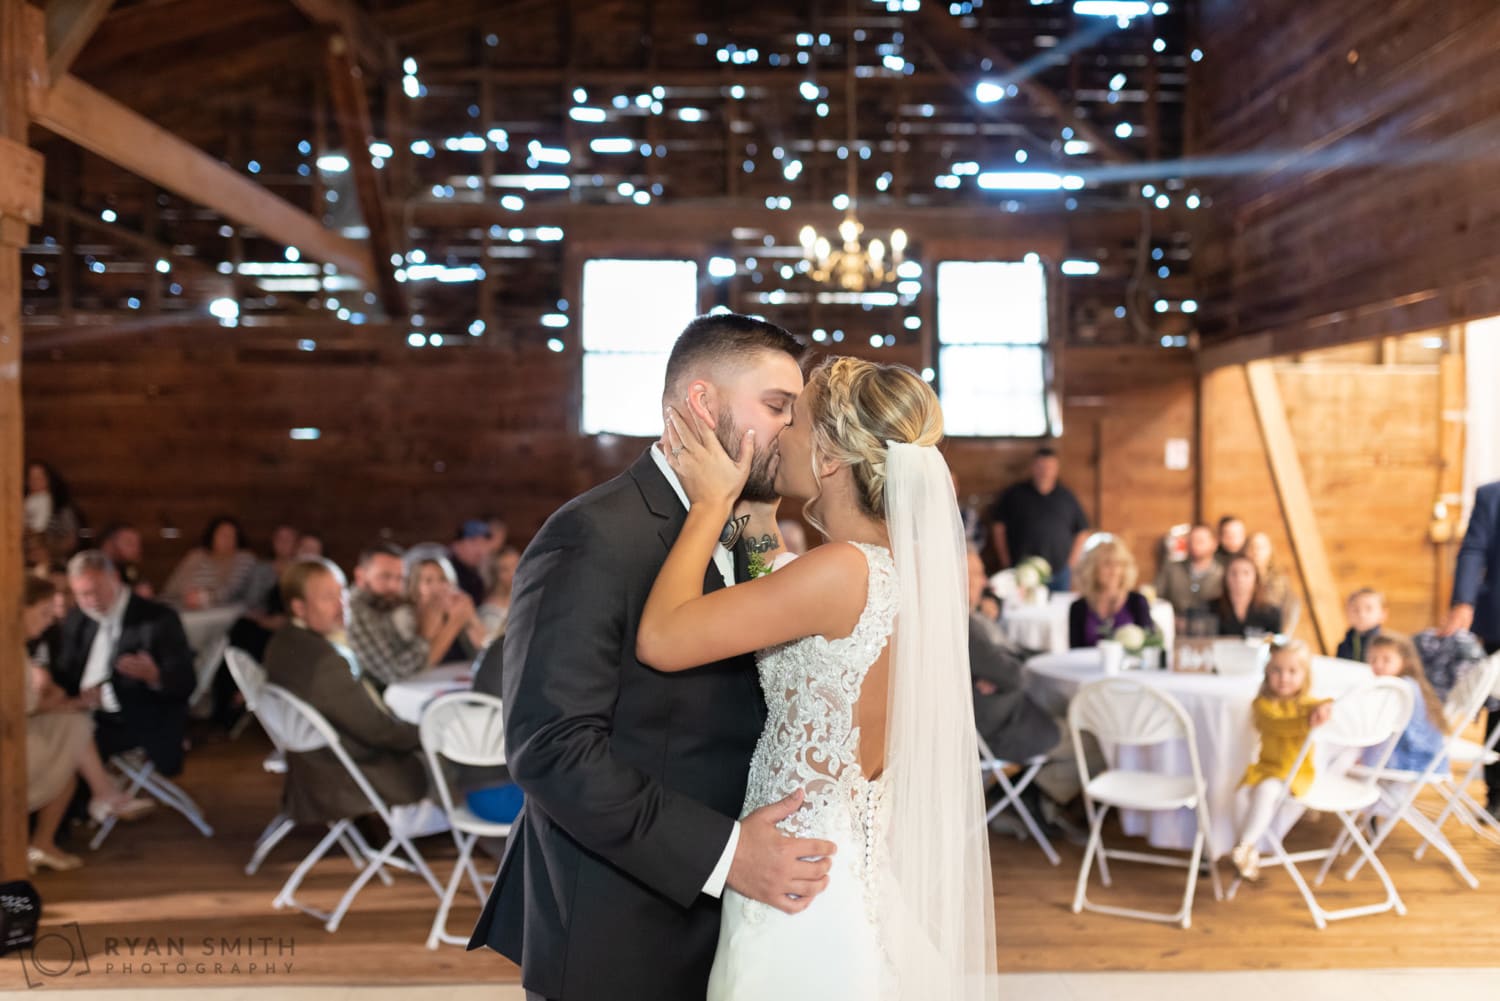 Kiss on the dance floor with sunlight filtering through the wall - Peanut Warehouse - Conway